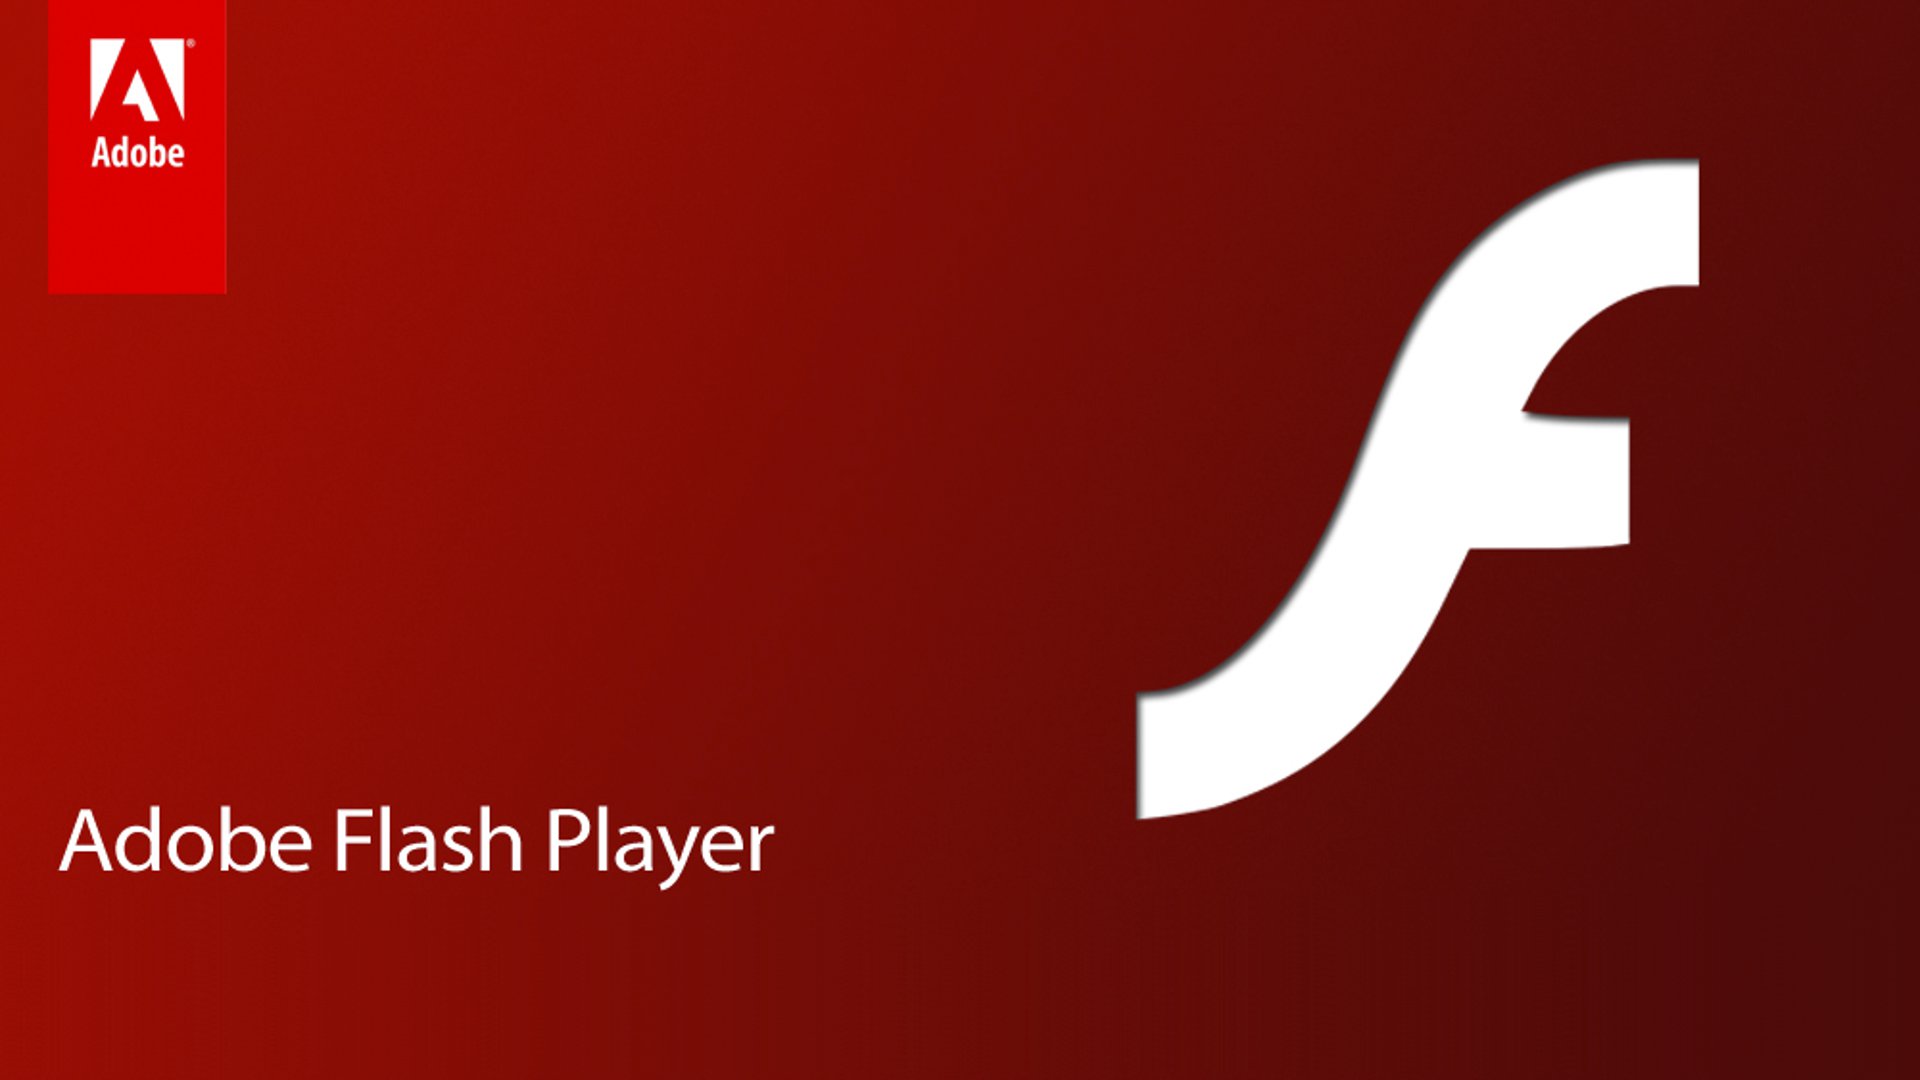 download adobe flash player for mac os x 10.7.4